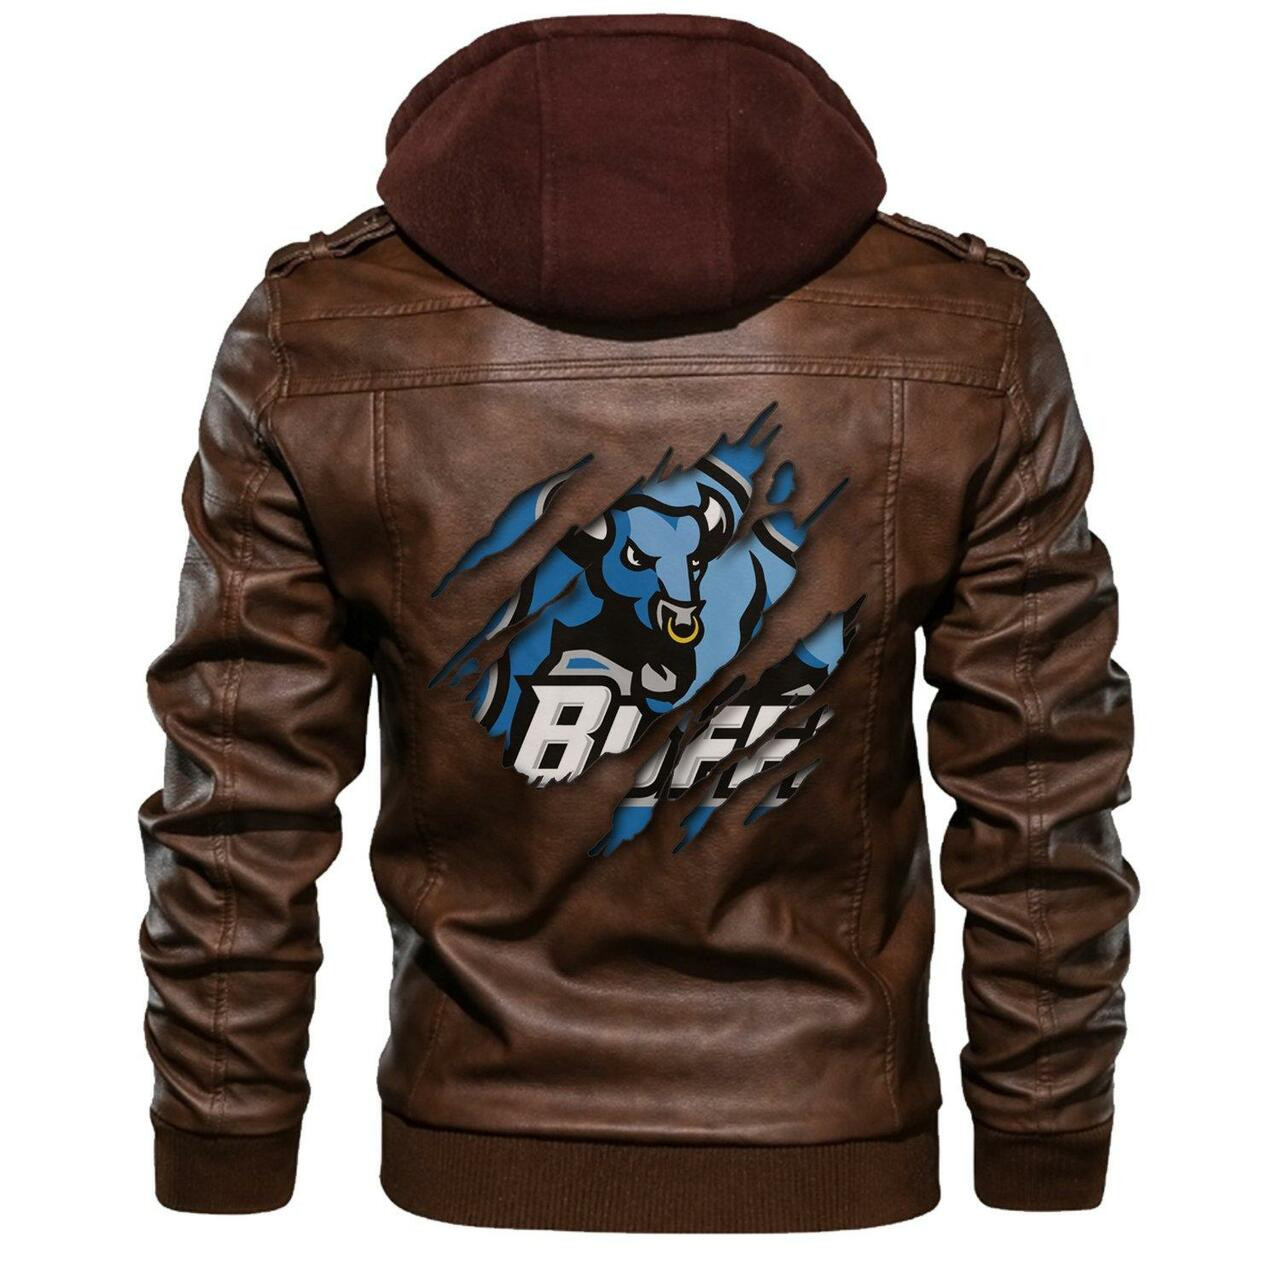 You can find a good leather jacket by access our website 35